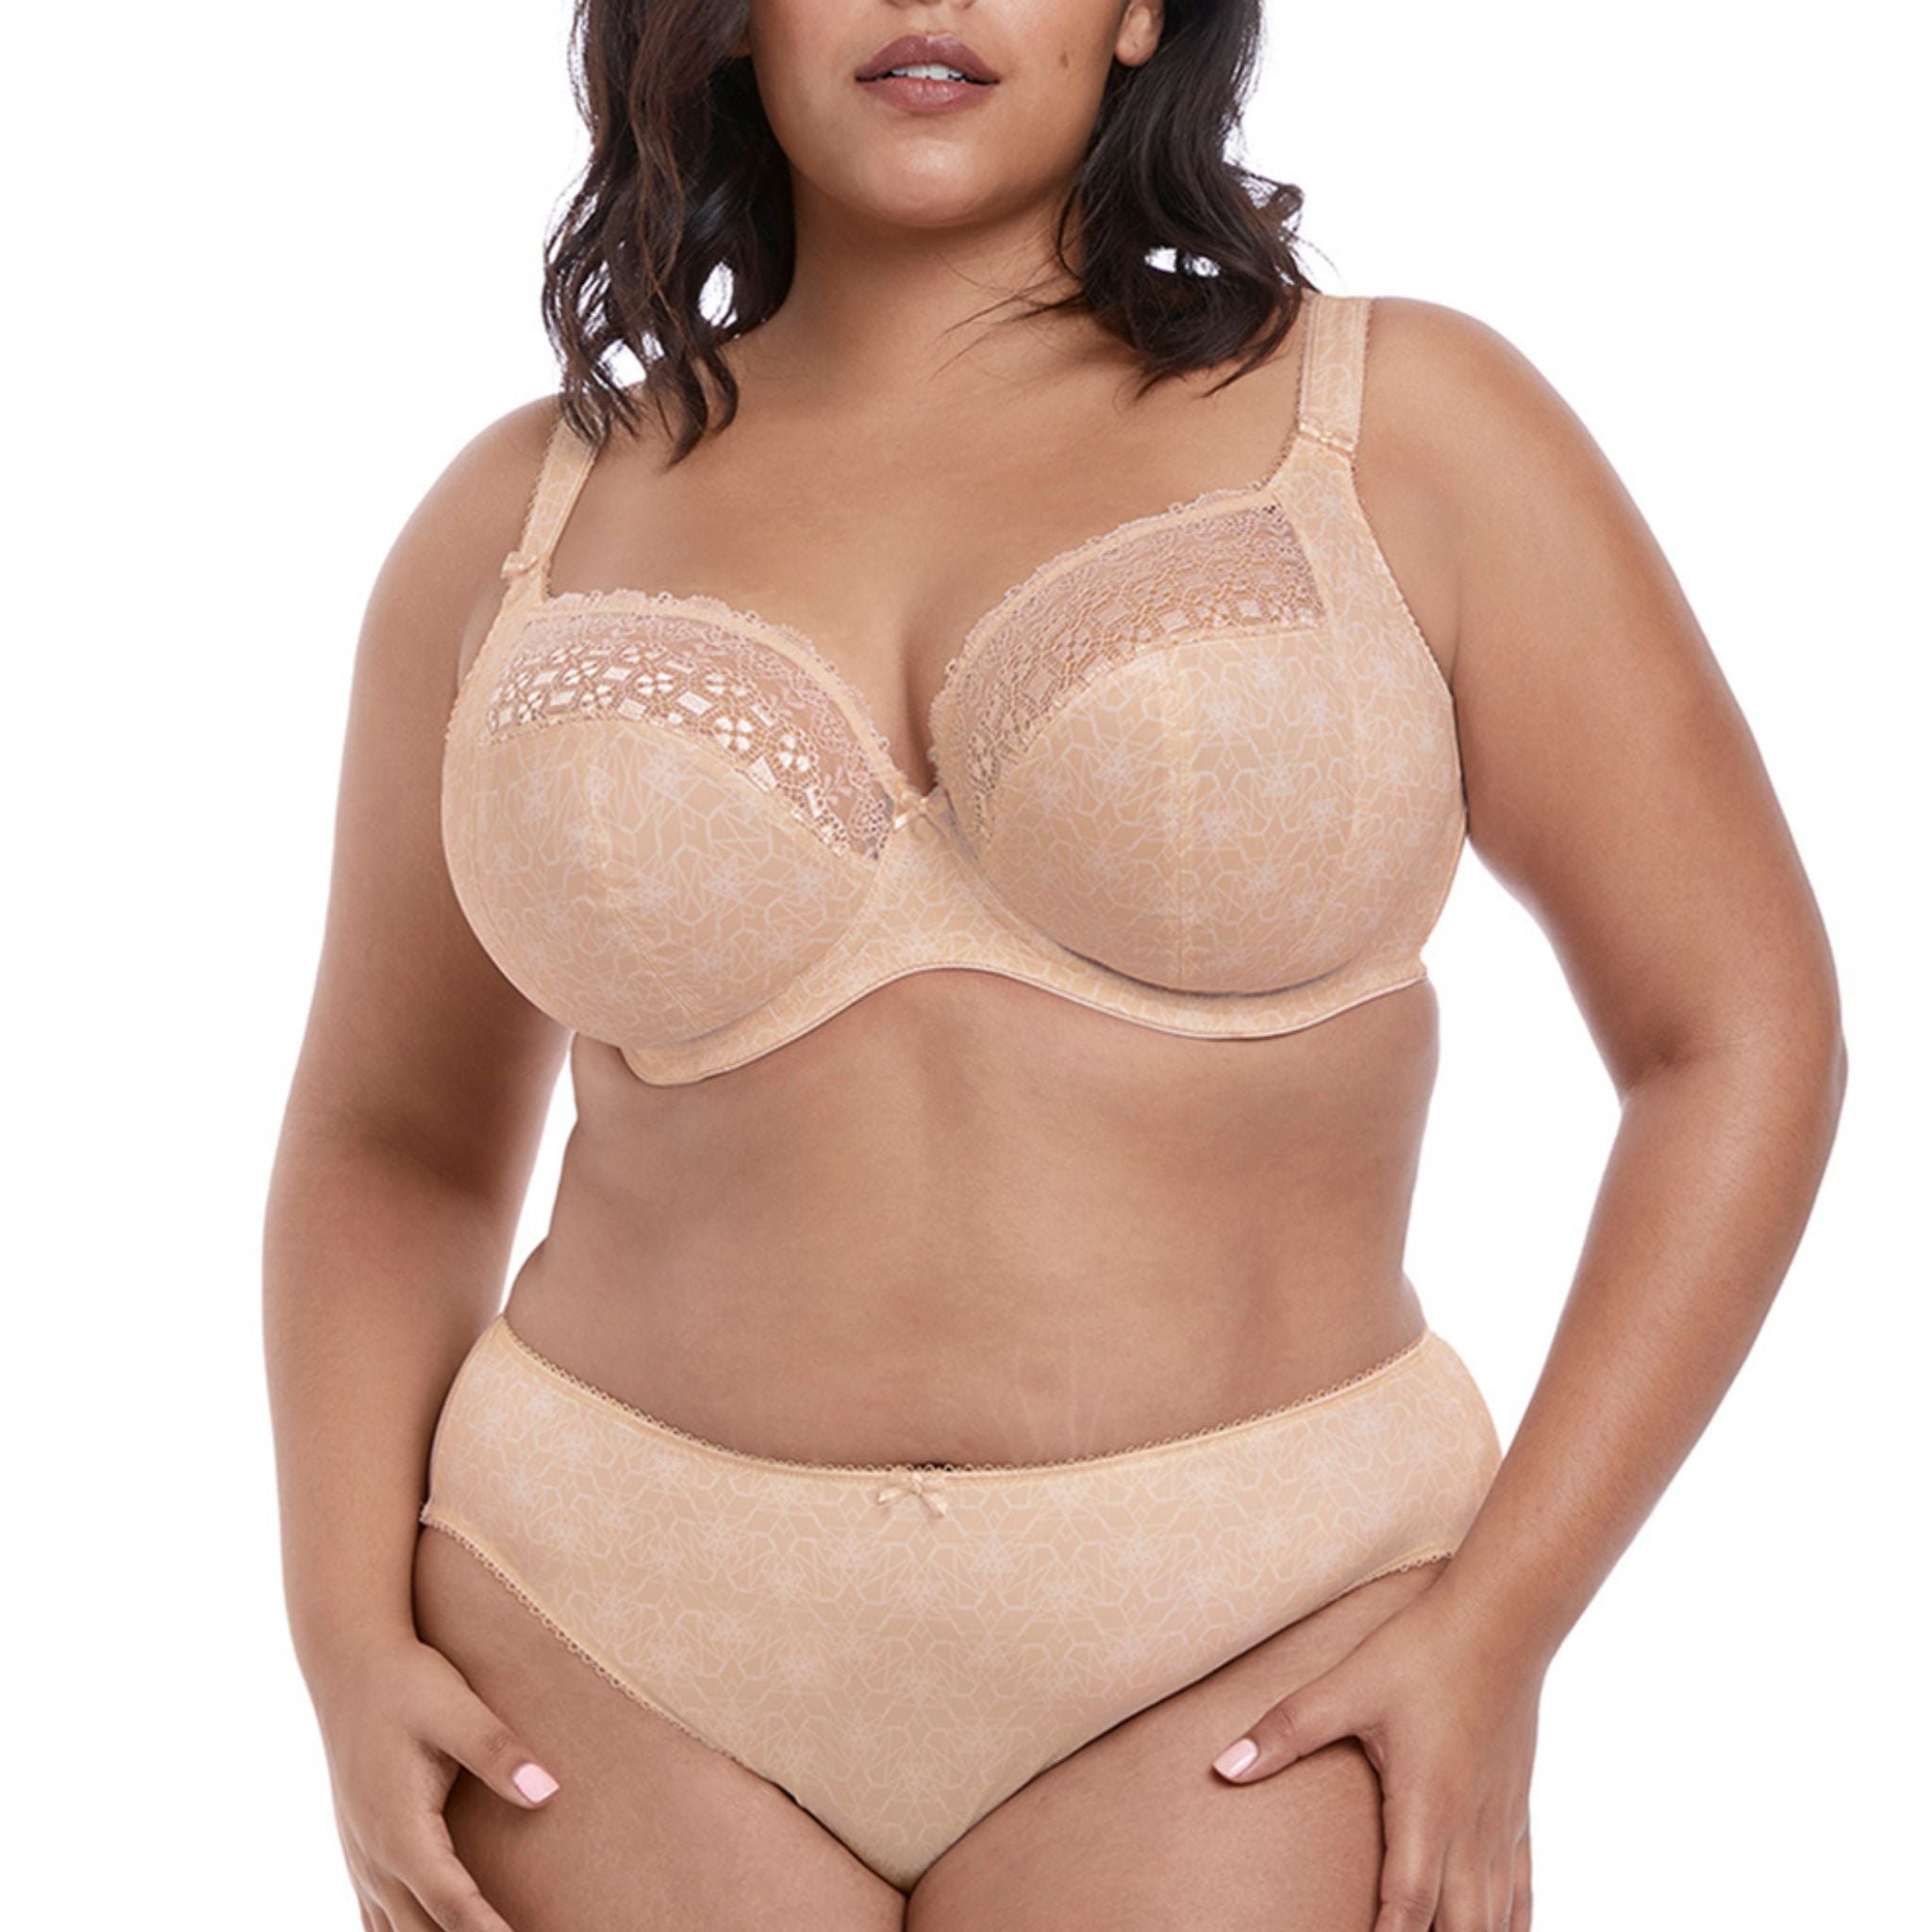 The Kim Plunge Bra in a rich Caramel shade is an essential for every lingerie drawer. Providing uplift and support for a great rounded shape and a low cut neckline for plunge without push up. A subtle linear geometric print is teamed with pretty lace top cups for a contemporary look in sizes D – JJ.